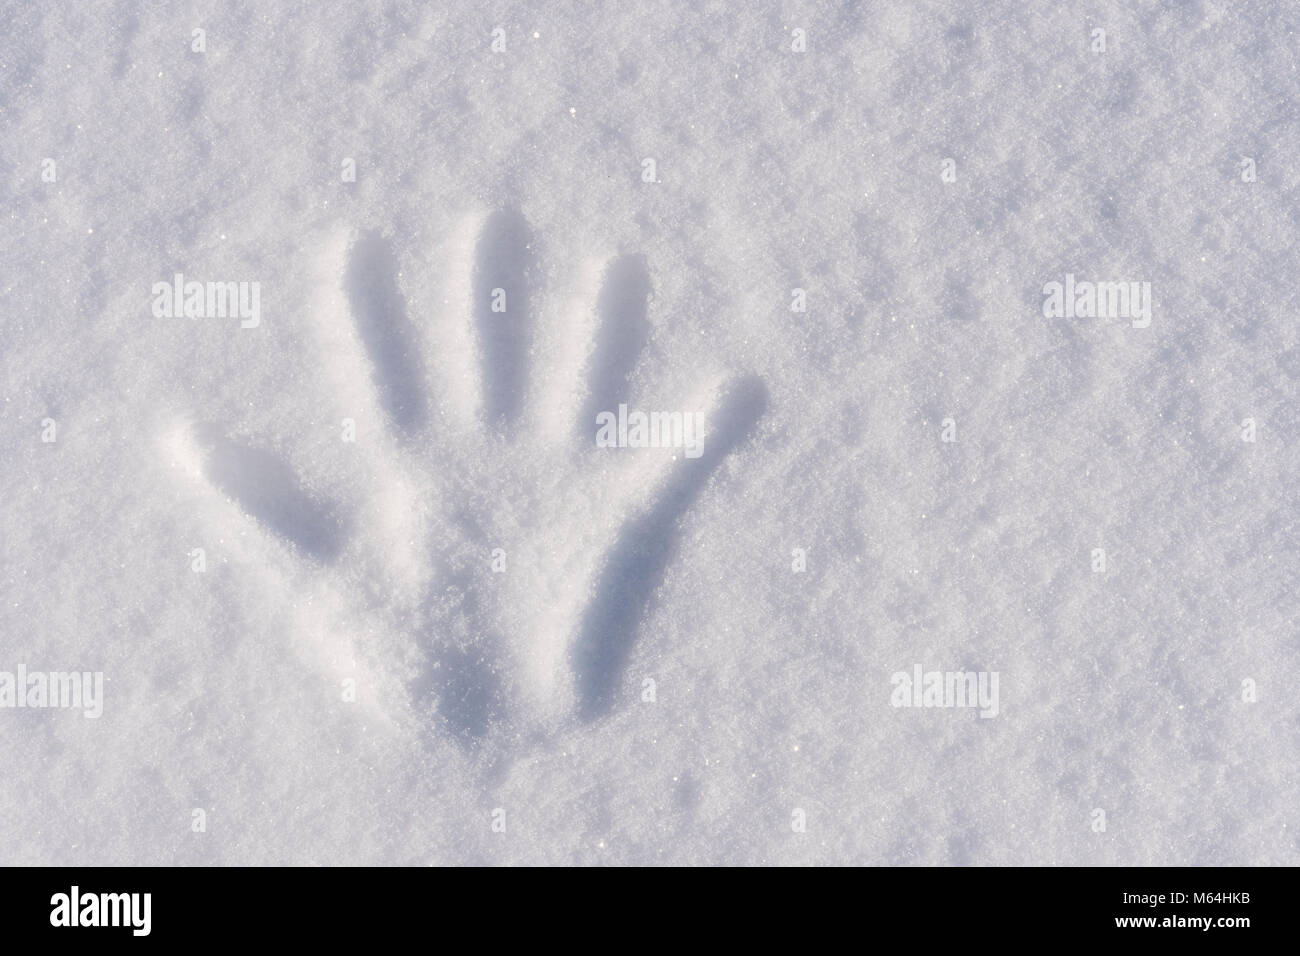 on the snow the imprint of the palm, winter and cold Stock Photo